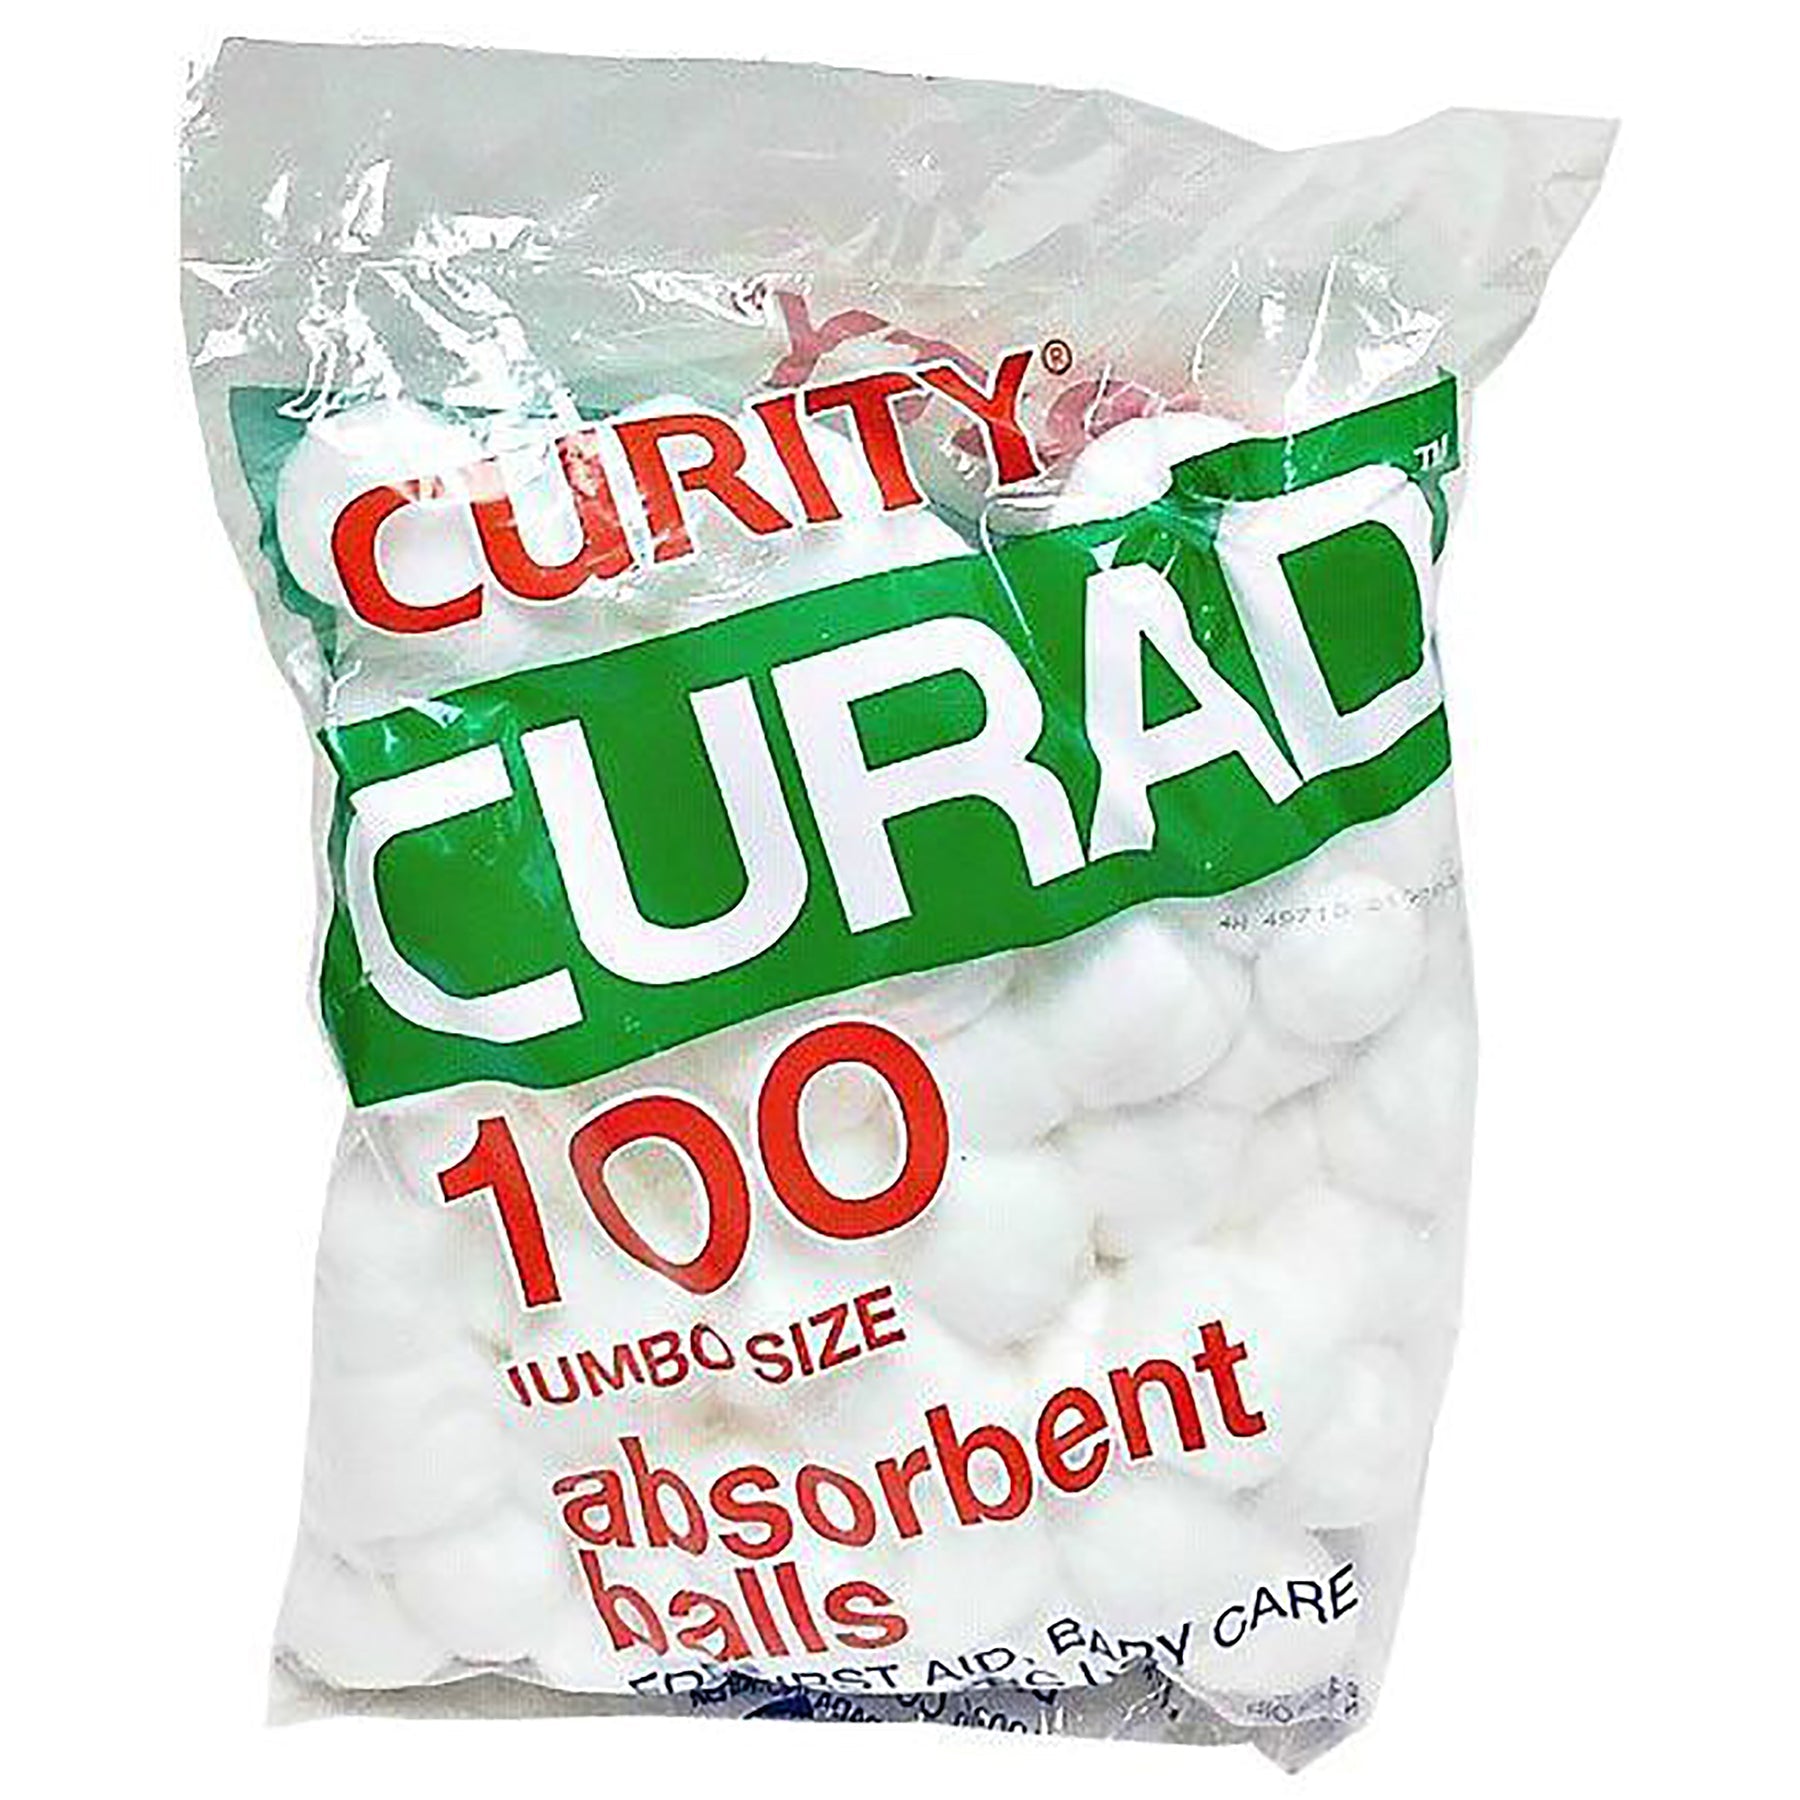 Curity 100 Jumbo Size Absorbant Balls White 100% Cotton 1.25in